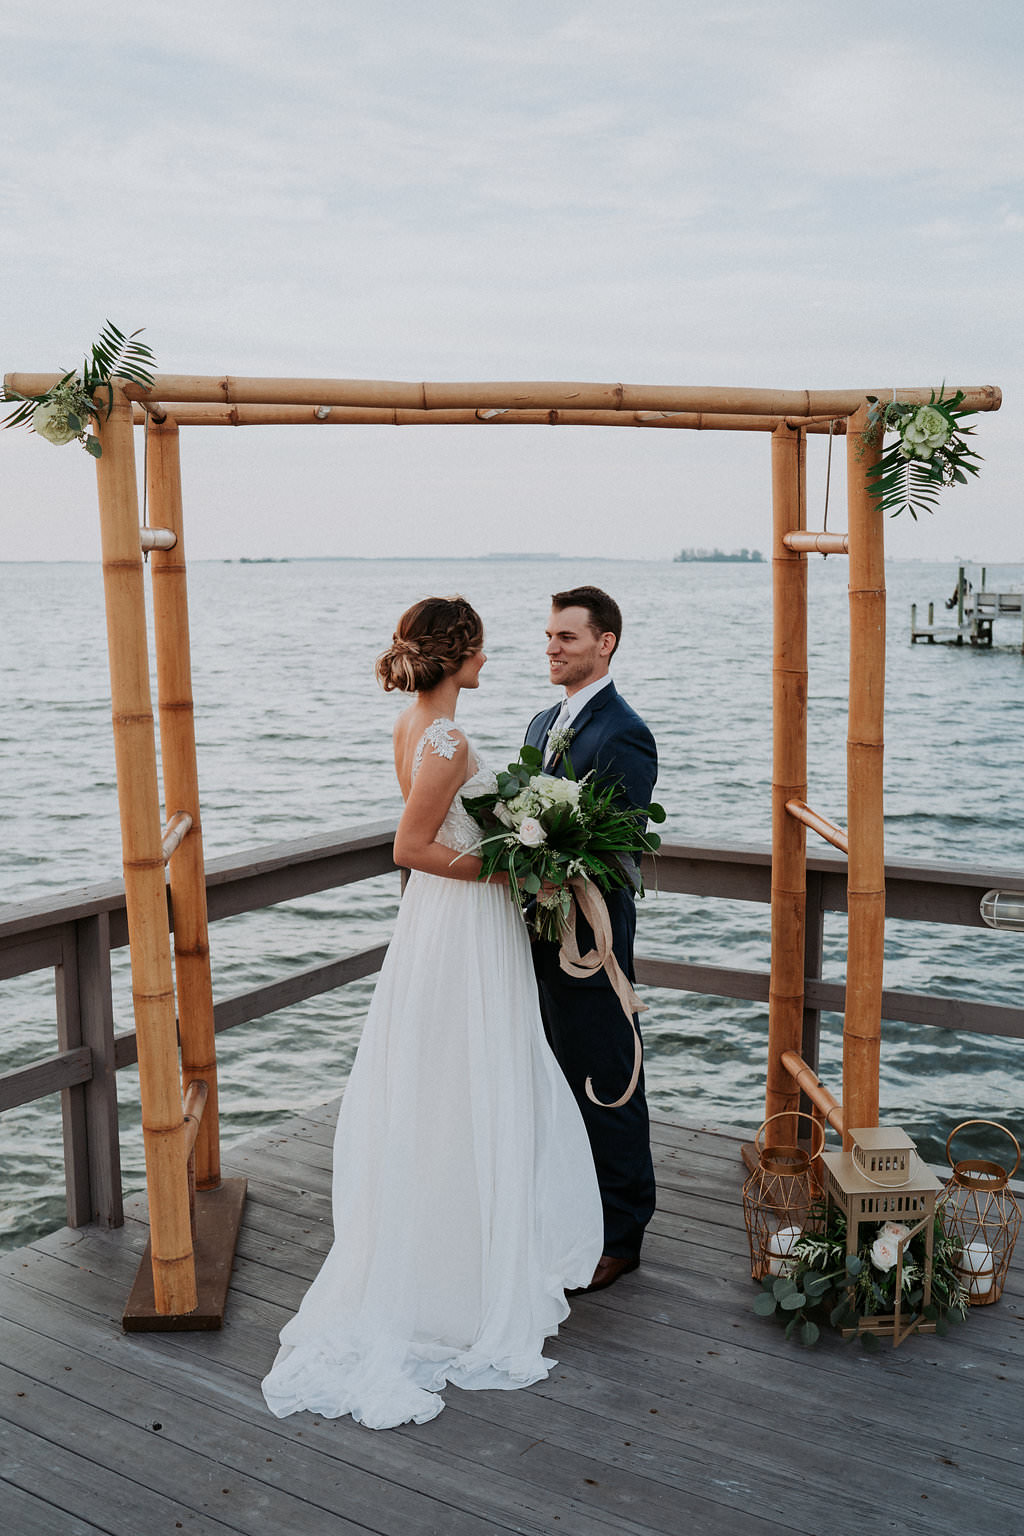 Coastal Themed Waterfront Wedding Ceremony Portrait with Bamboo Arch with Vintage Hurricane Lanterns and Natural Tropical Greenery and White Florals | Dunedin Waterfront Hotel Wedding Venue Beso Del Sol Resort | Tampa Bay Wedding Photographer Grind and Press Photography